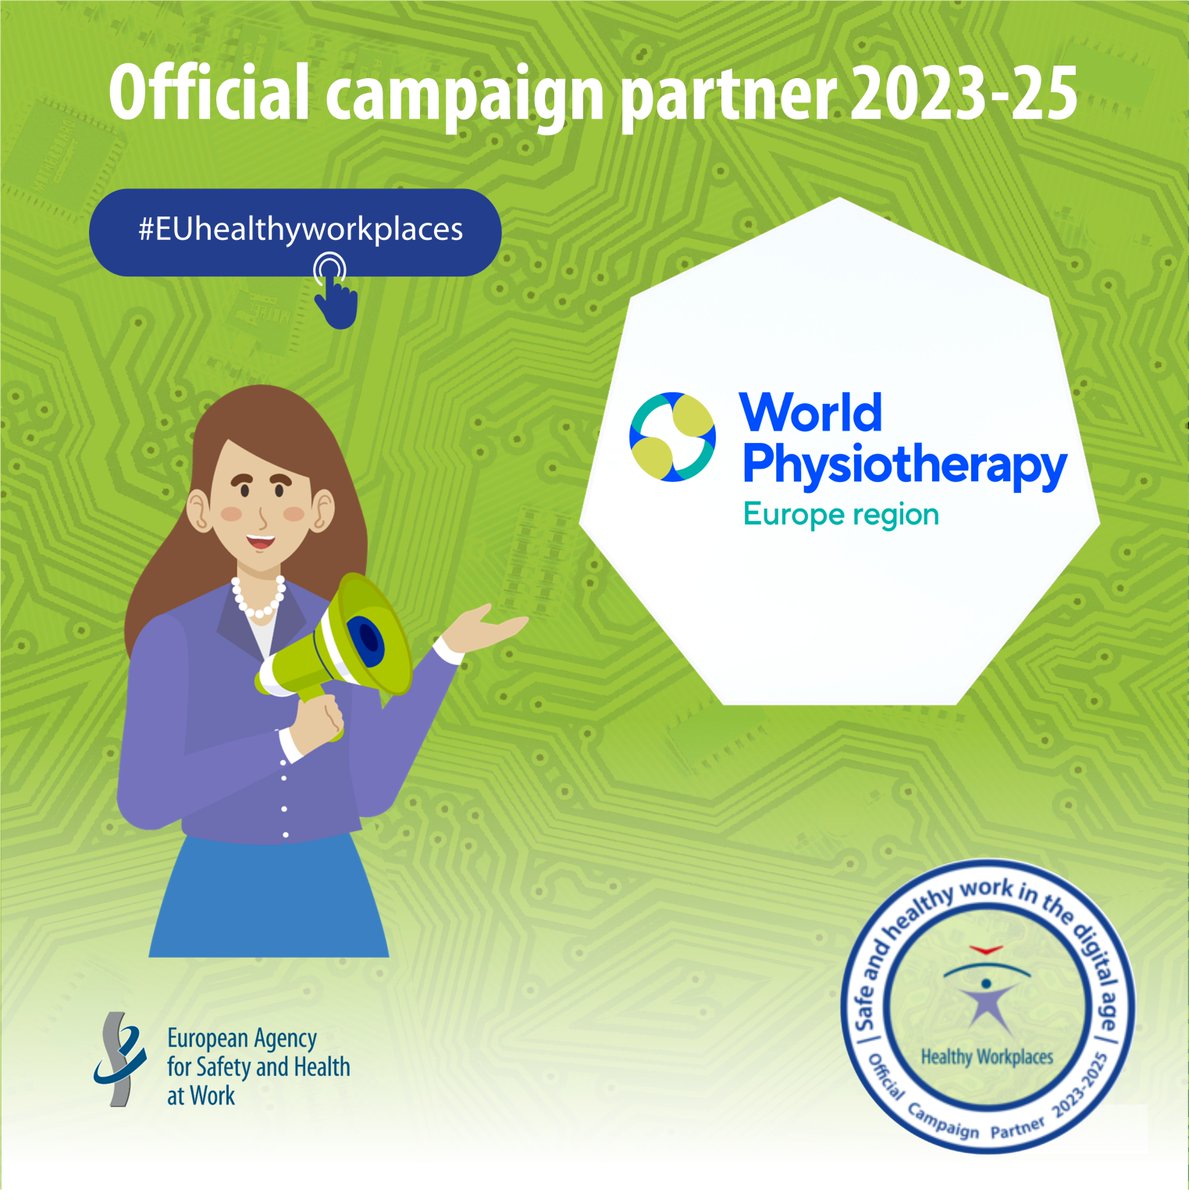 🏃‍♂️ #EUhealthyworkplaces campaign partner @ERWorldPhysio has launched #MoveAtWork, to: 💡 Create healthier workspaces 🤖 Highlight #digitalisation and its impact on psychosocial factors 🦴 Prevent work-related musculoskeletal disorders ➕ And more! 🔗 healthy-workplaces.osha.europa.eu/en/media-centr…